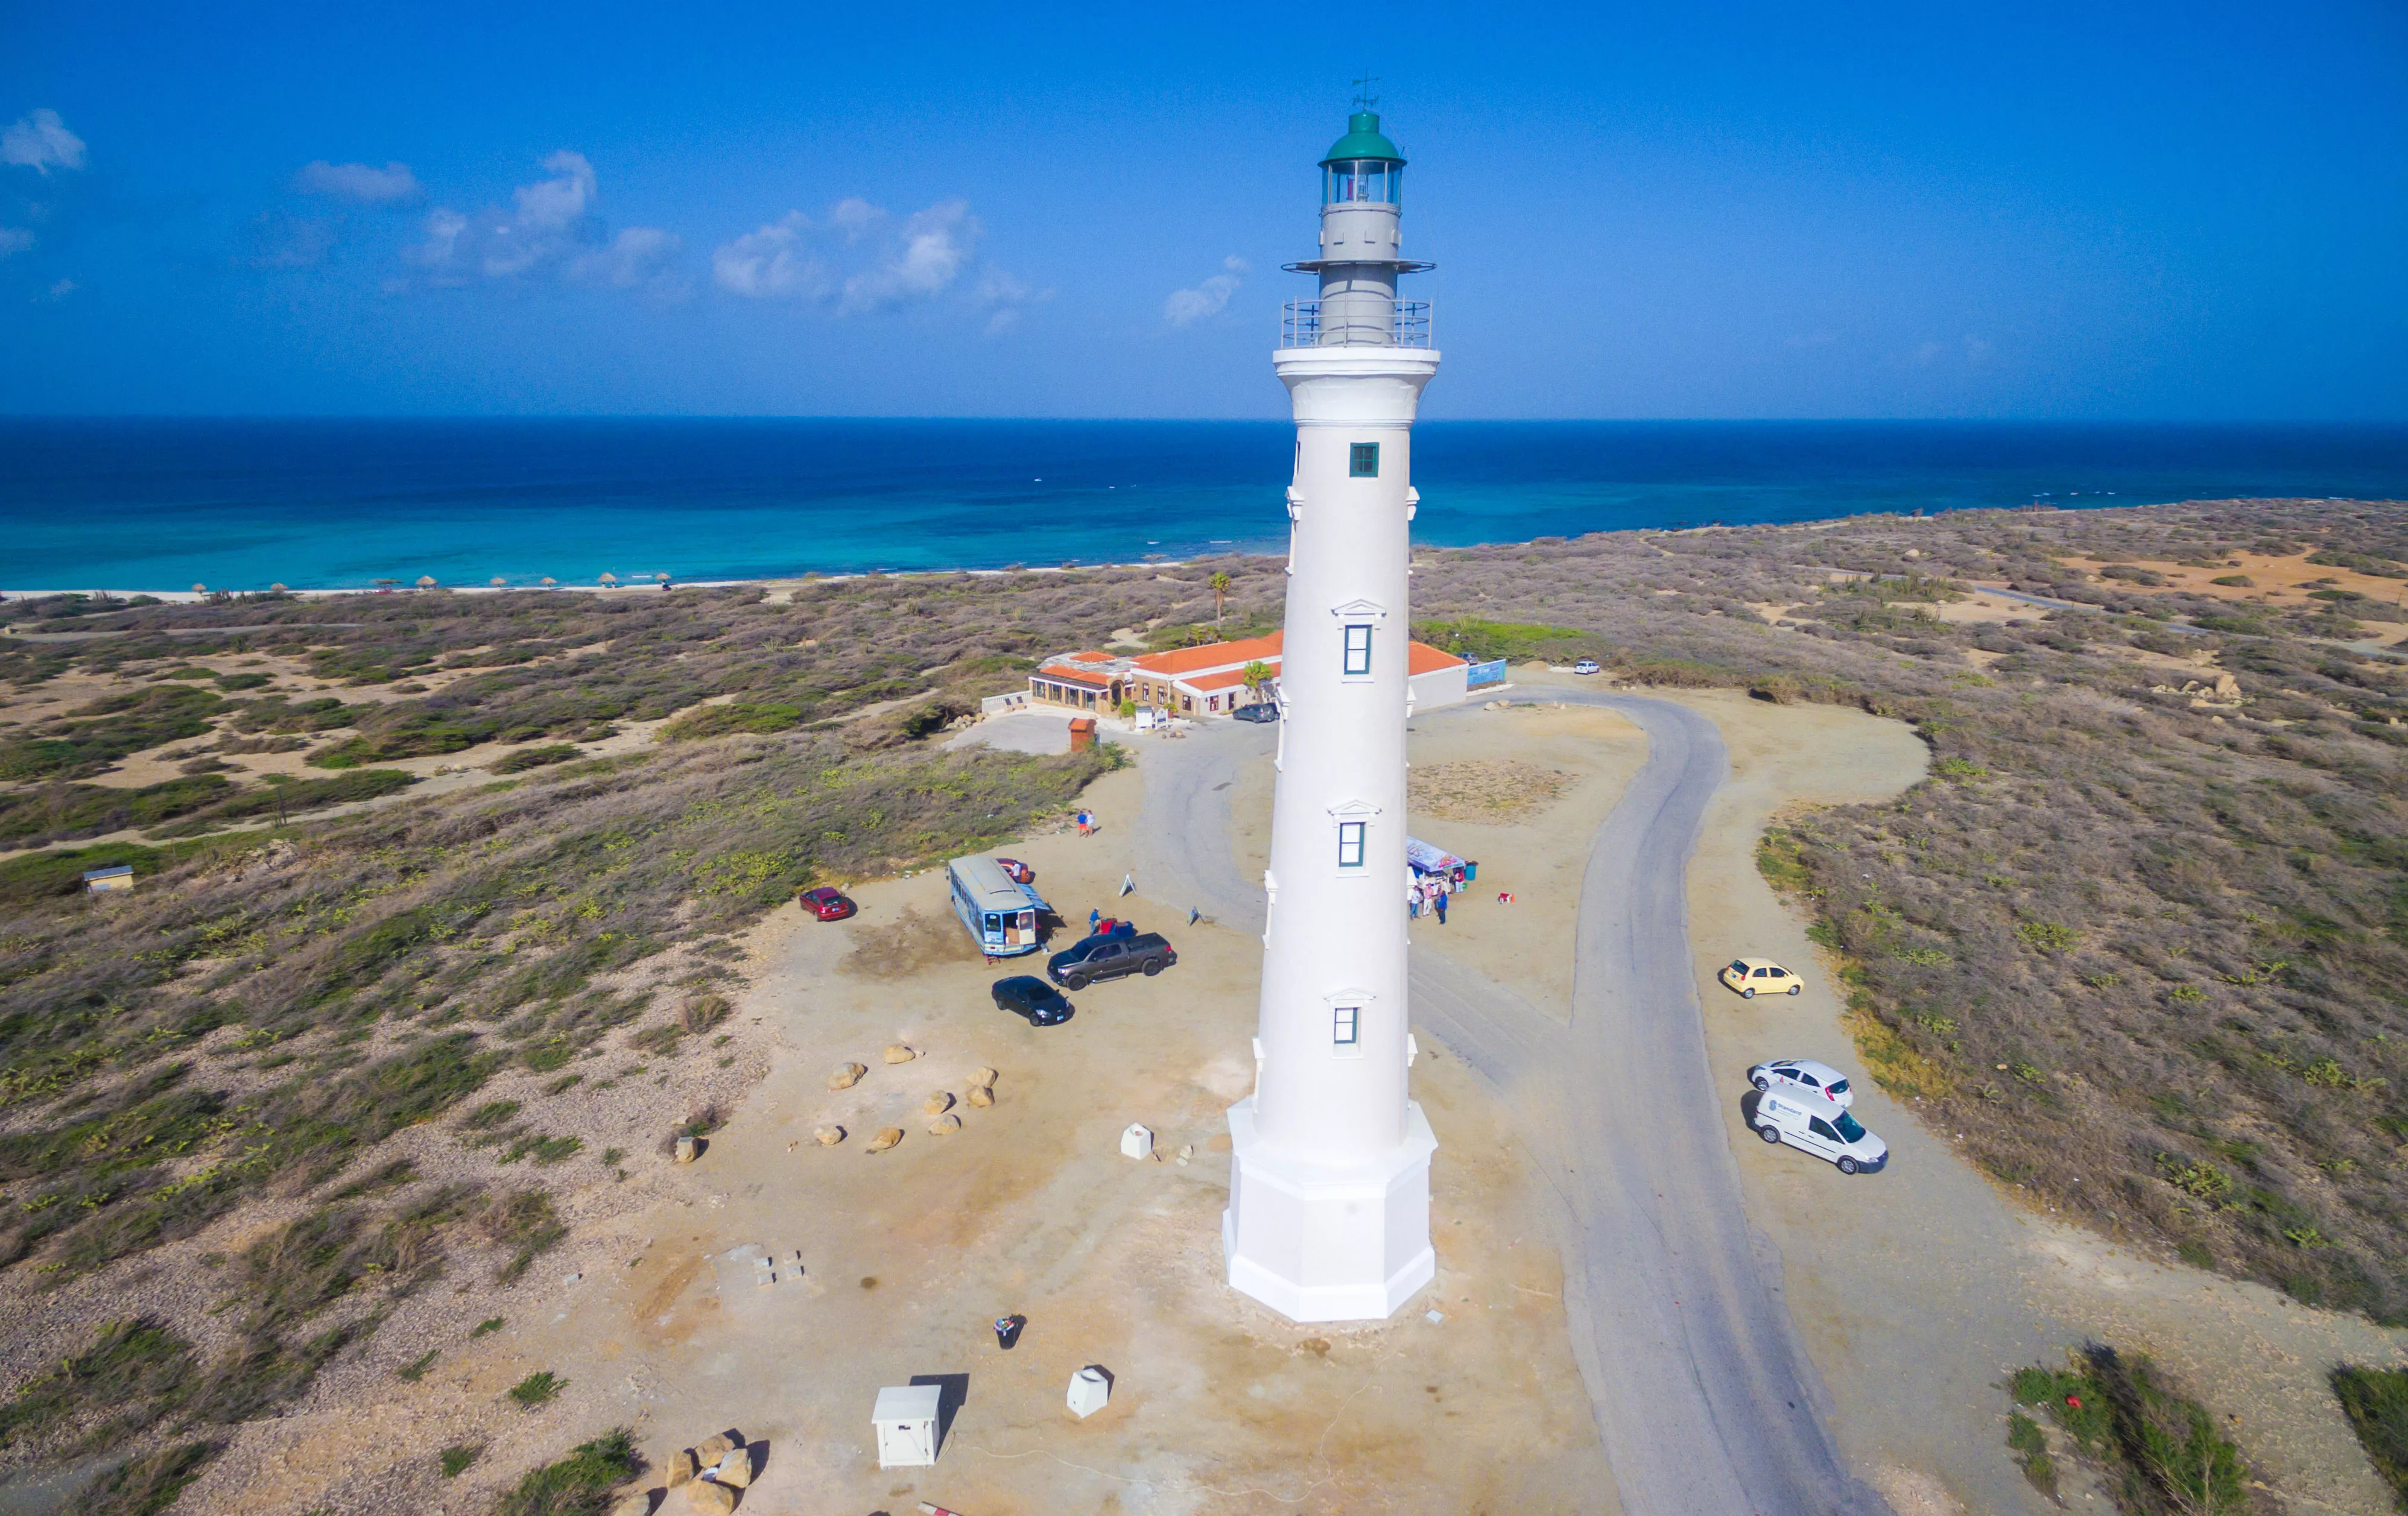 California Lighthouse in Aruba, Caribbean | Architecture - Rated 3.7